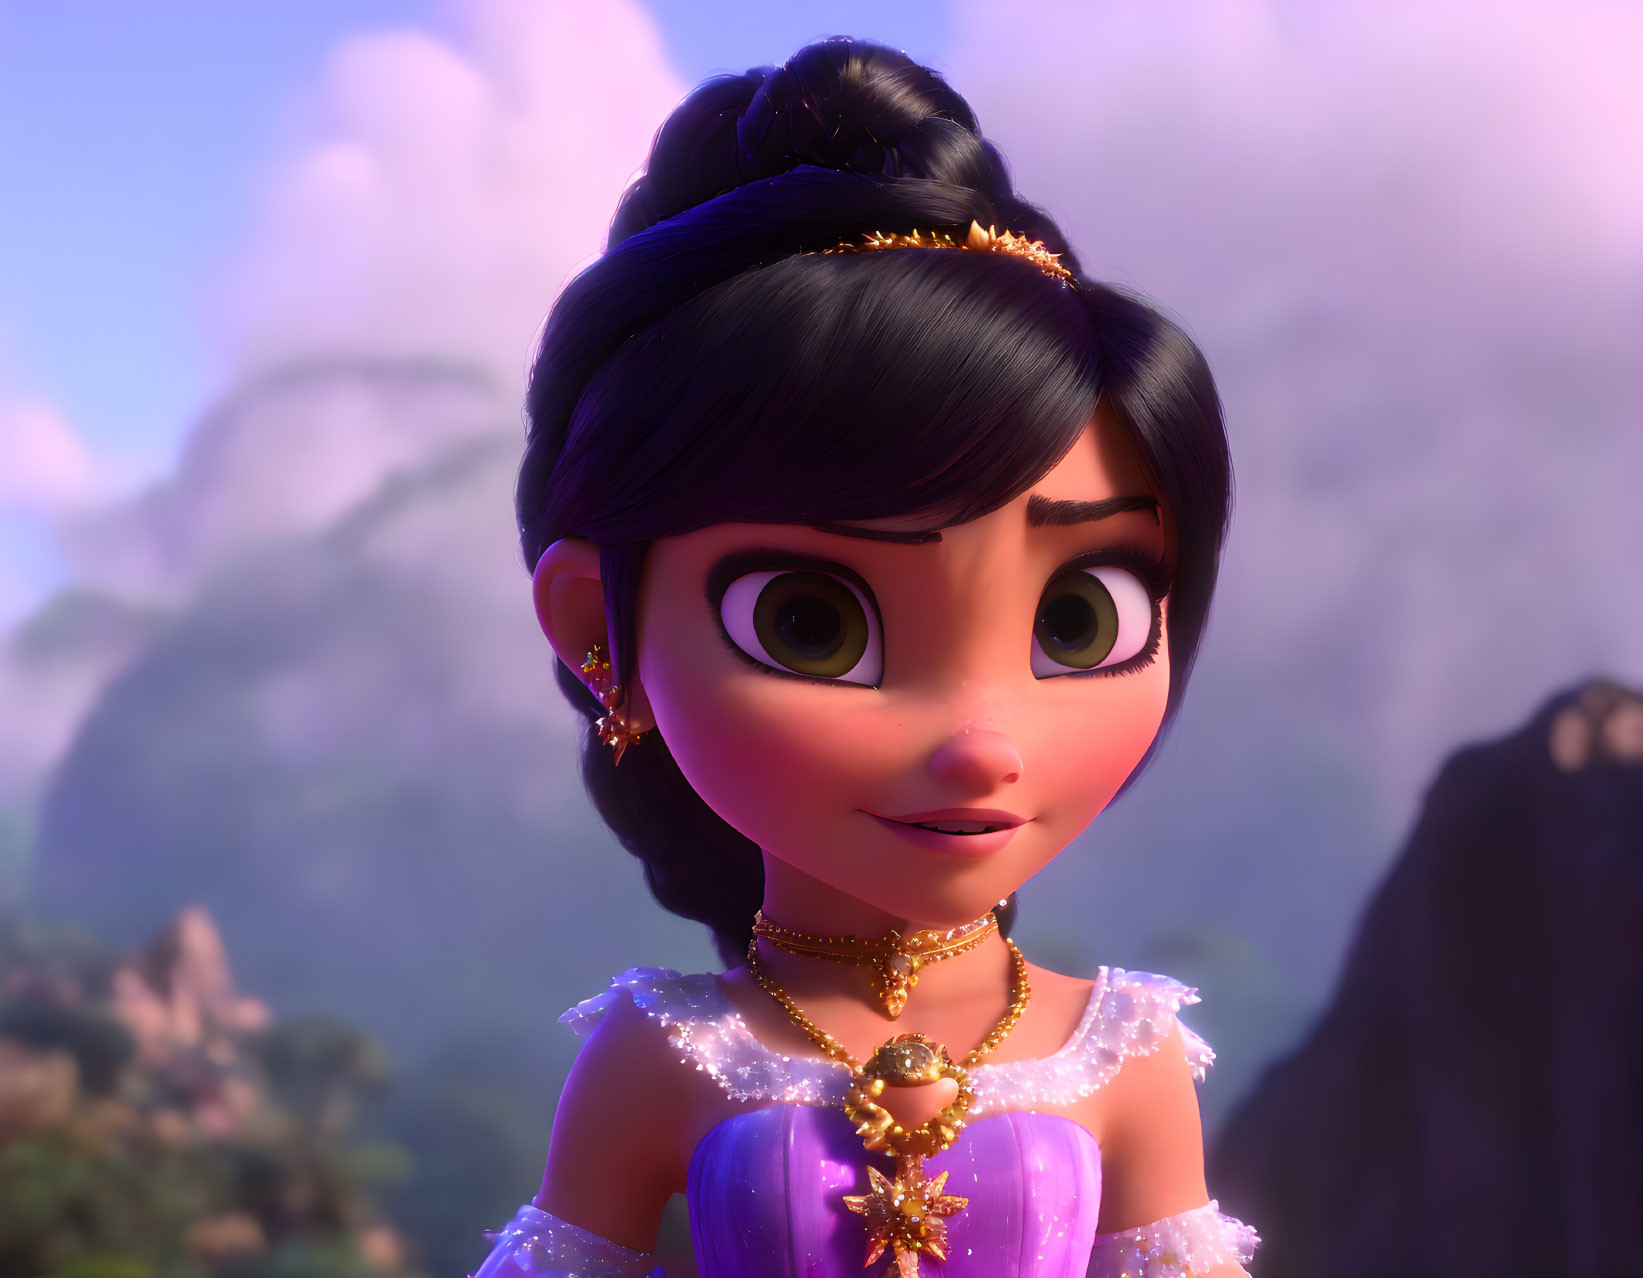 Dark-Haired 3D Animated Character in Purple Dress with Golden Jewelry